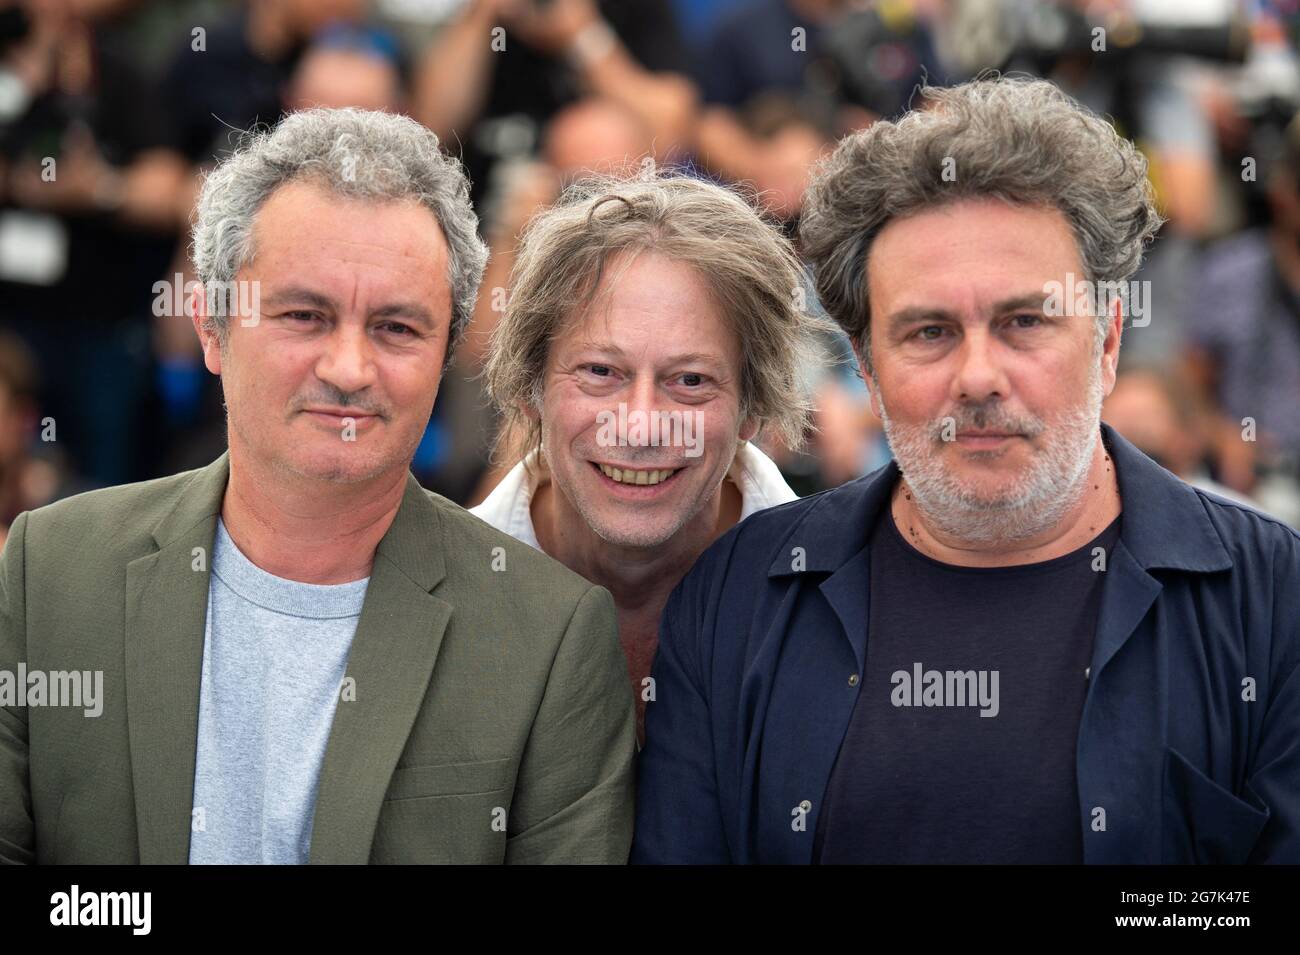 Cannes, France, 14th July 2021. Jean-Marie Larrieu, Arnaud Larrieu, Mathieu  Amalric attending the Tralala Photocall as part of the 74th Cannes  International Film Festival in Cannes, France on July 14, 2021. Photo